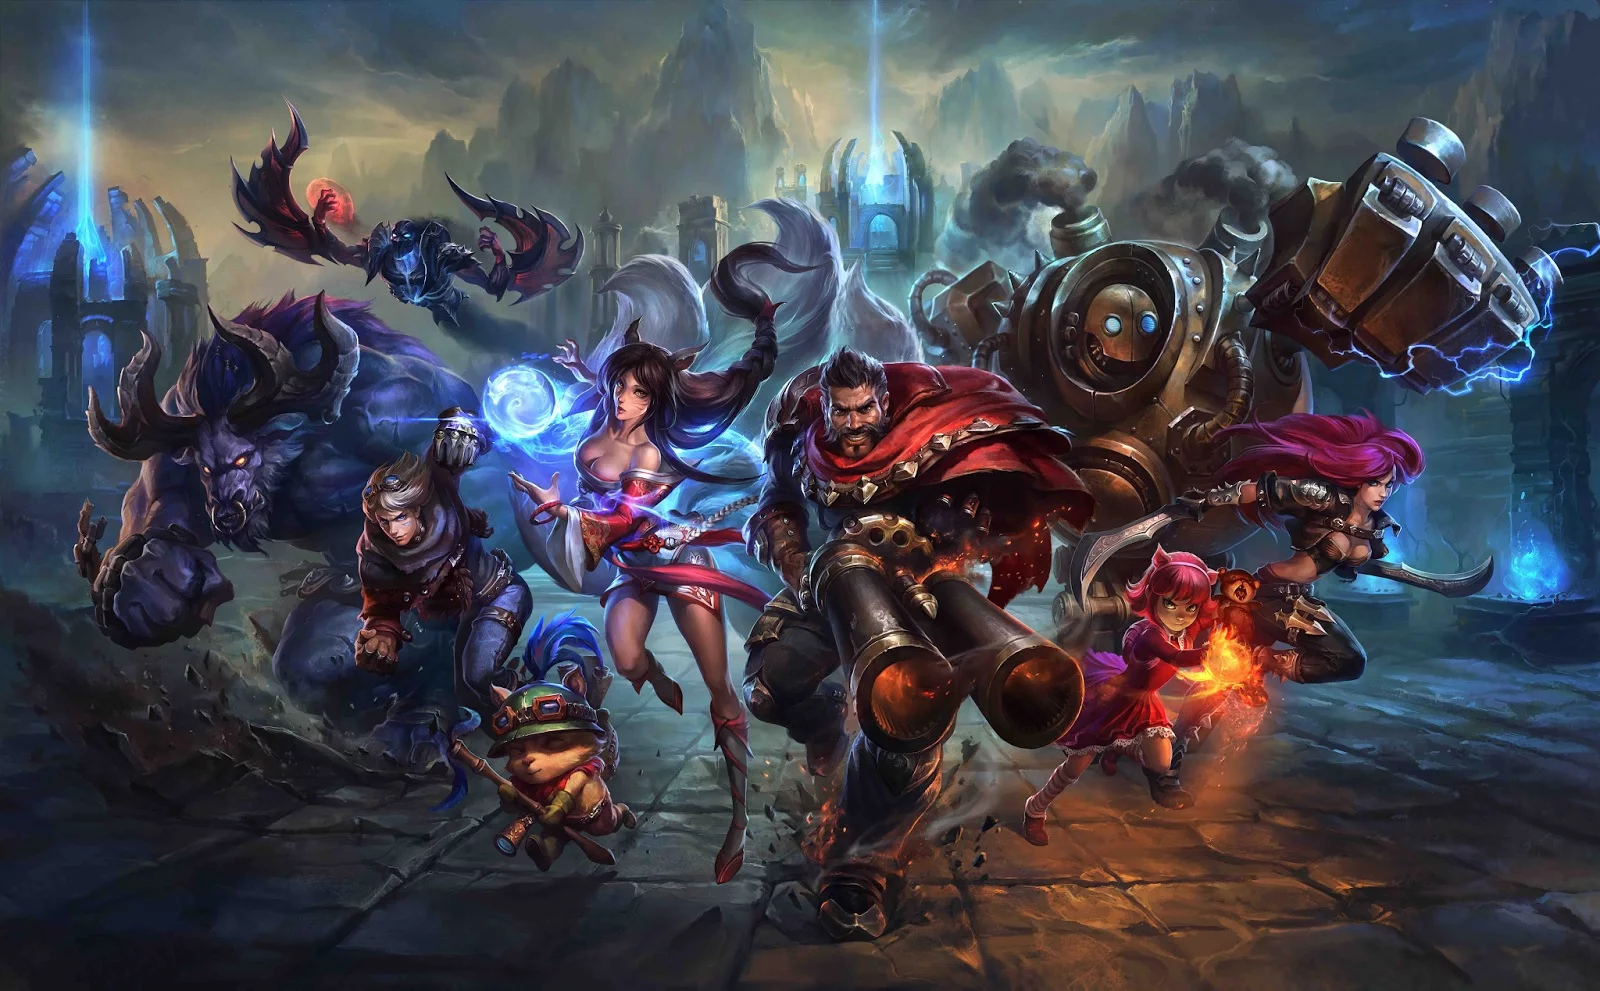 League of Legends will receive a Vampire Survivors-style game mode